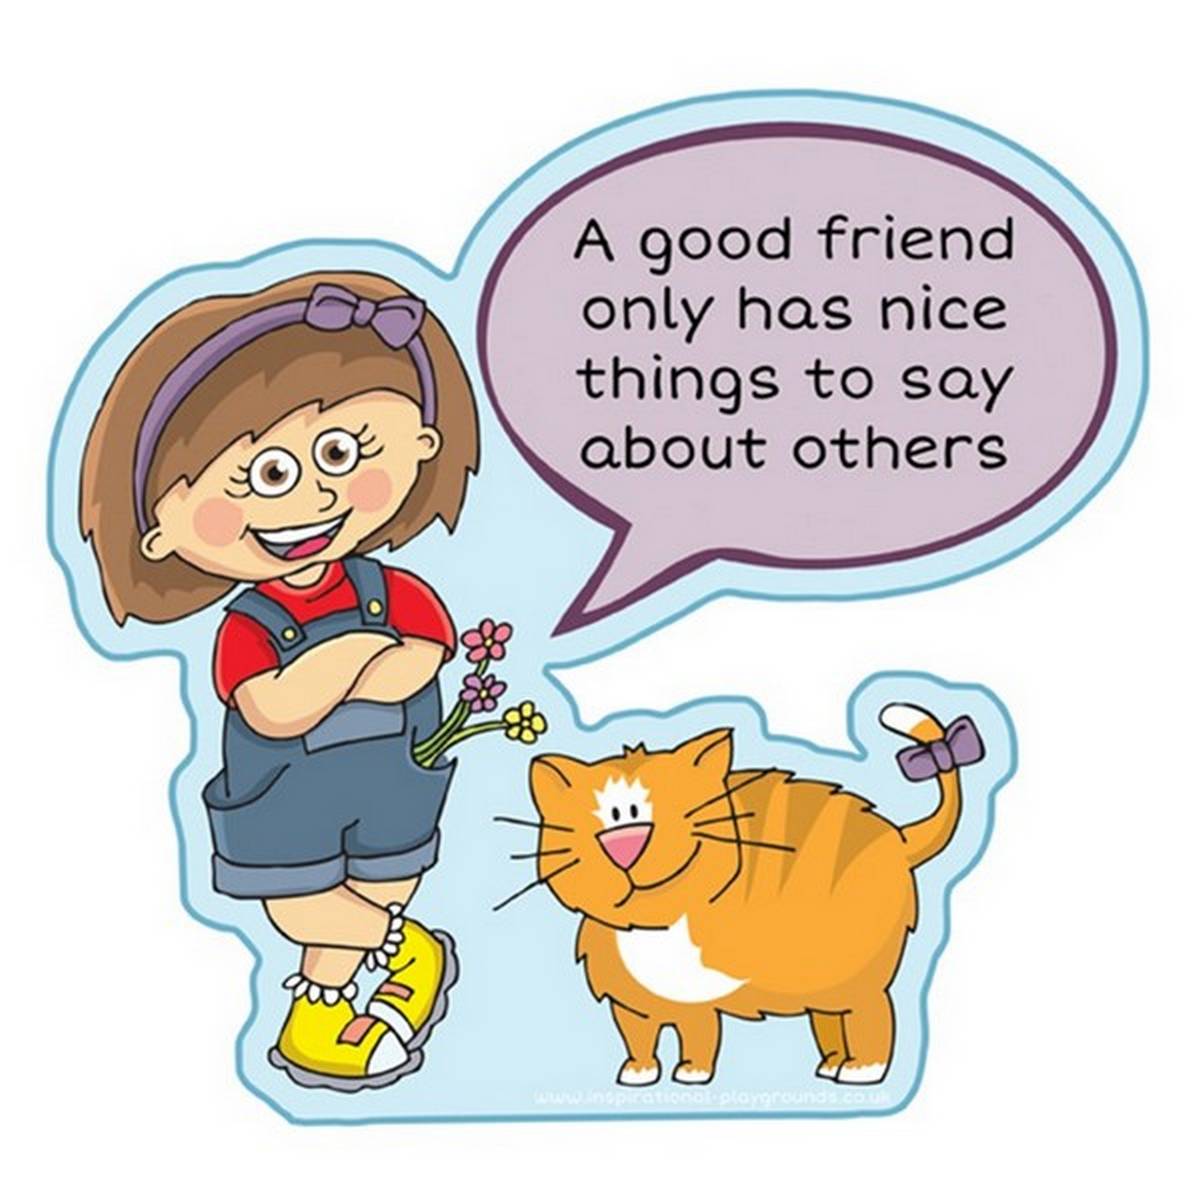 Good Friend - Things to say